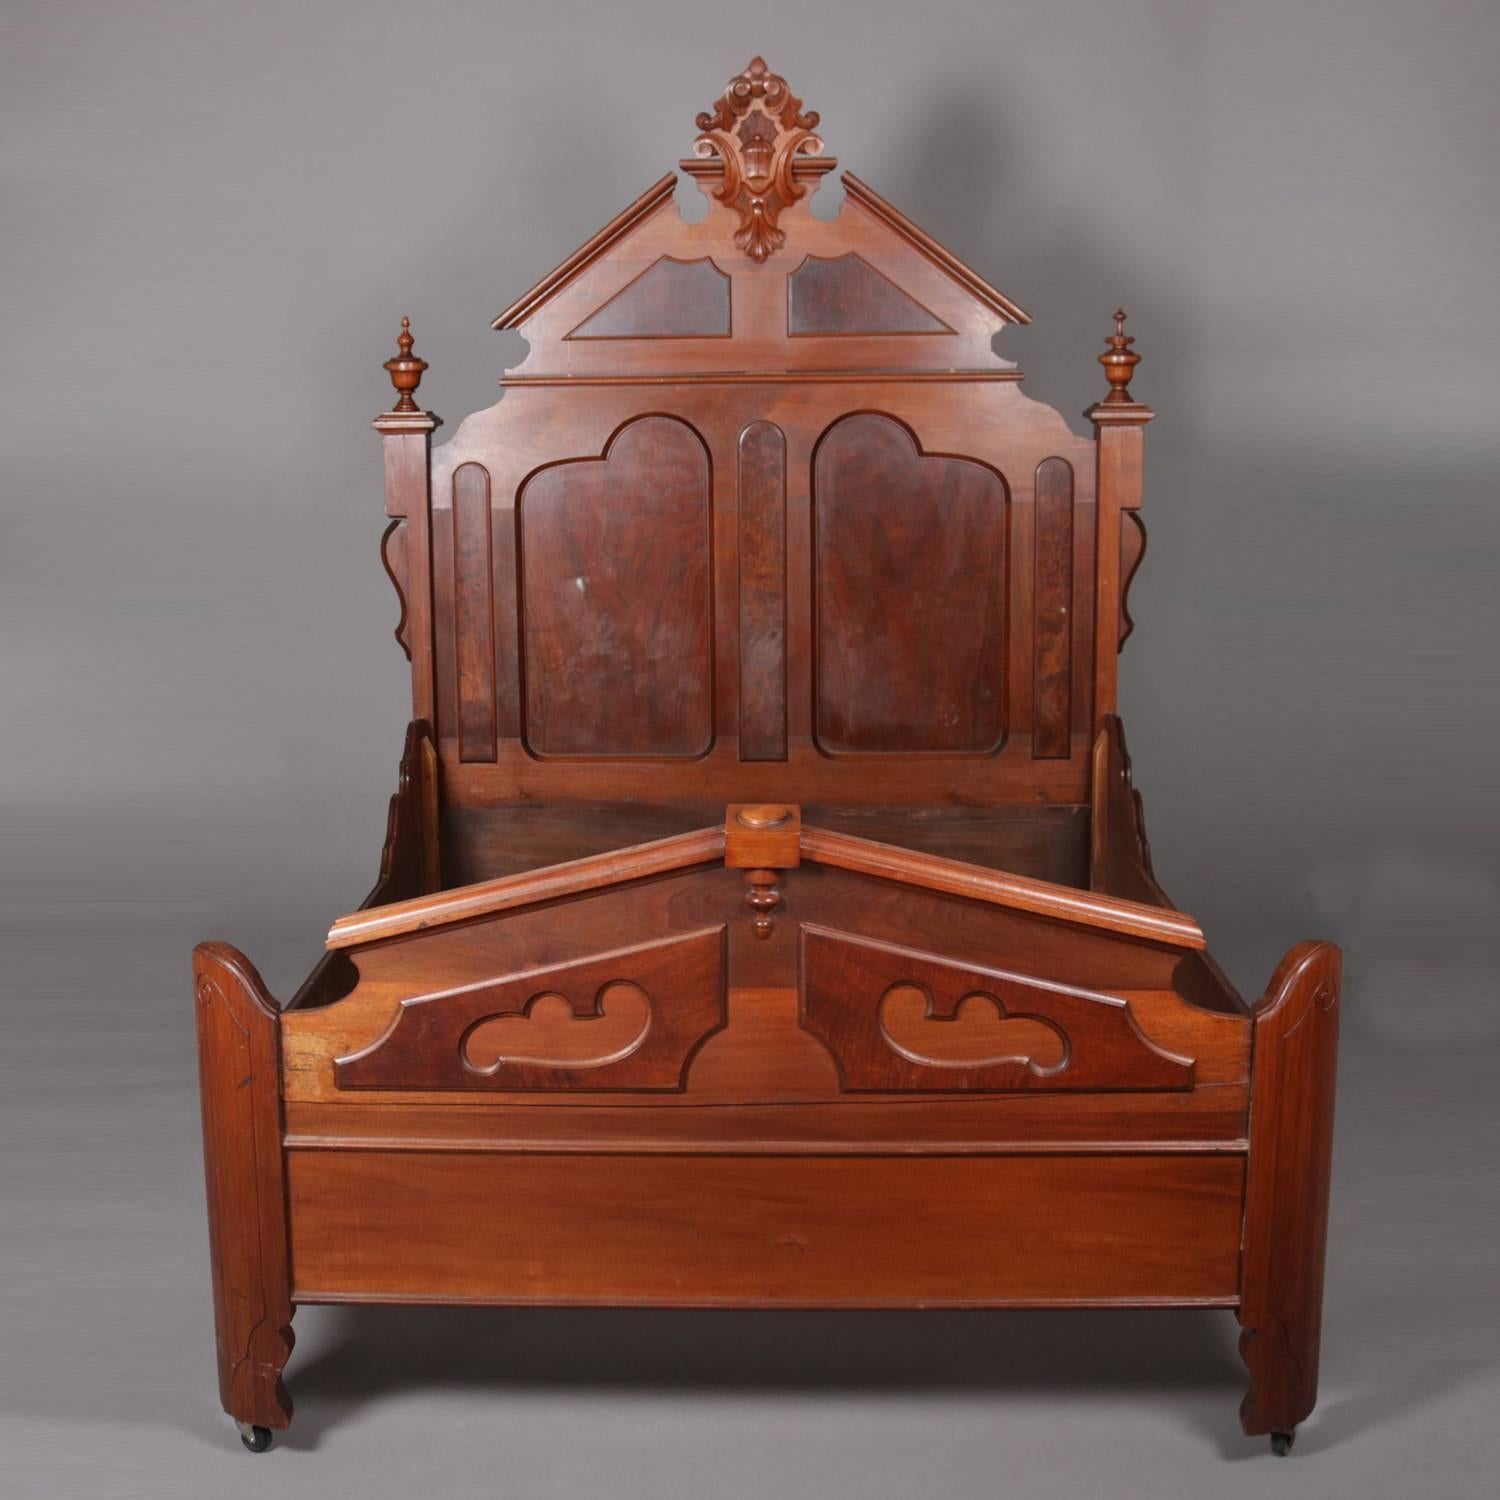 Antique Renaissance Revival carved walnut bed frame features broken arch crest with central scroll and foliate cartouche, headboard with burl panels and flanked by columns with turned finials, full/double size, circa 1890.

Measures: fr 77.5